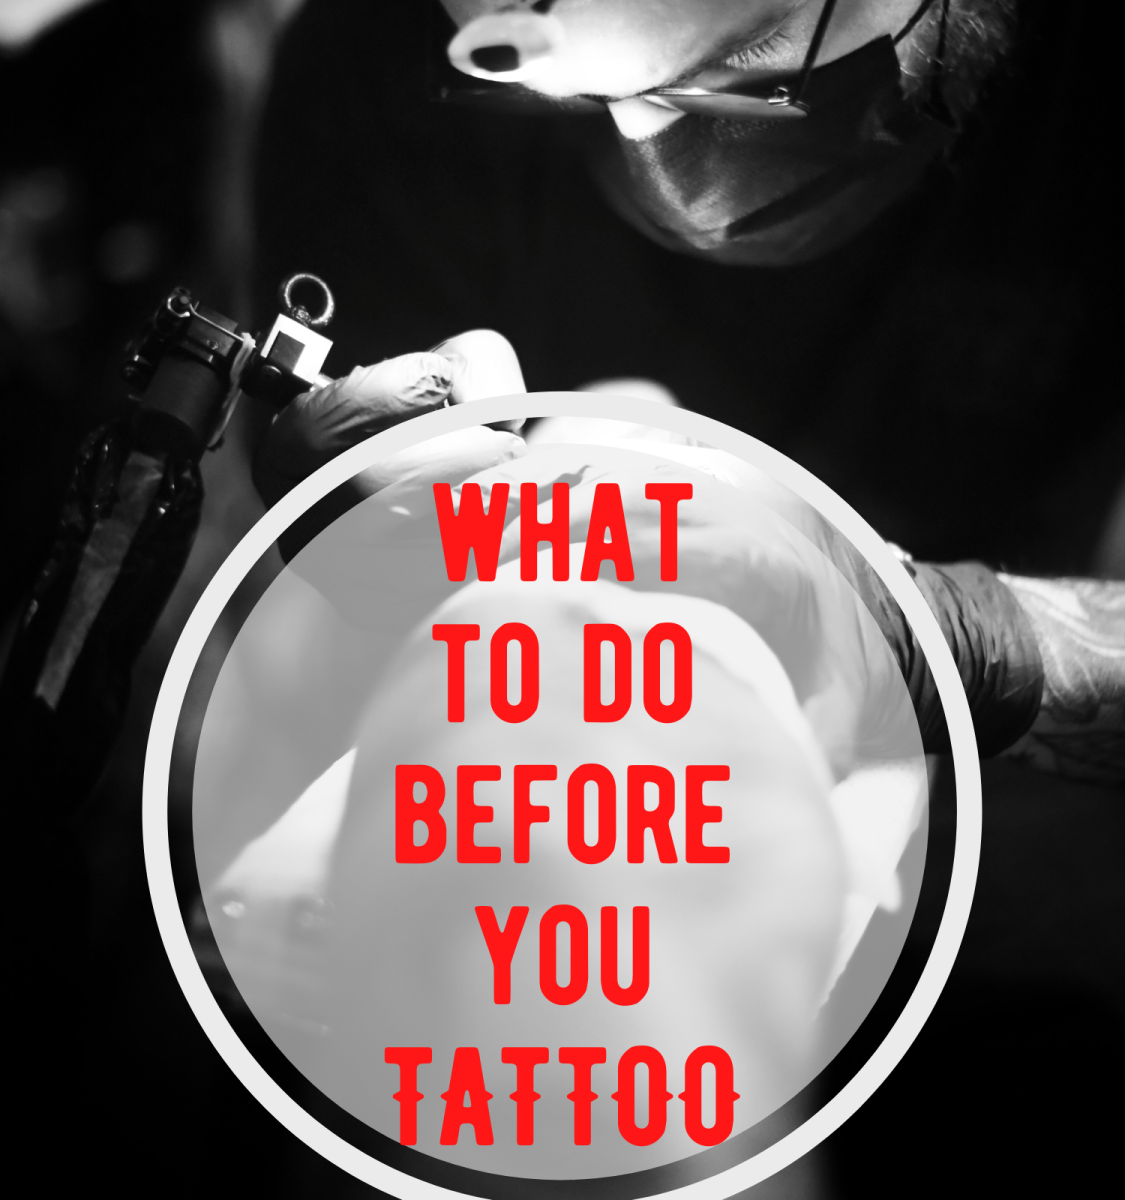 A list of things to do to prepare for getting a tattoo.